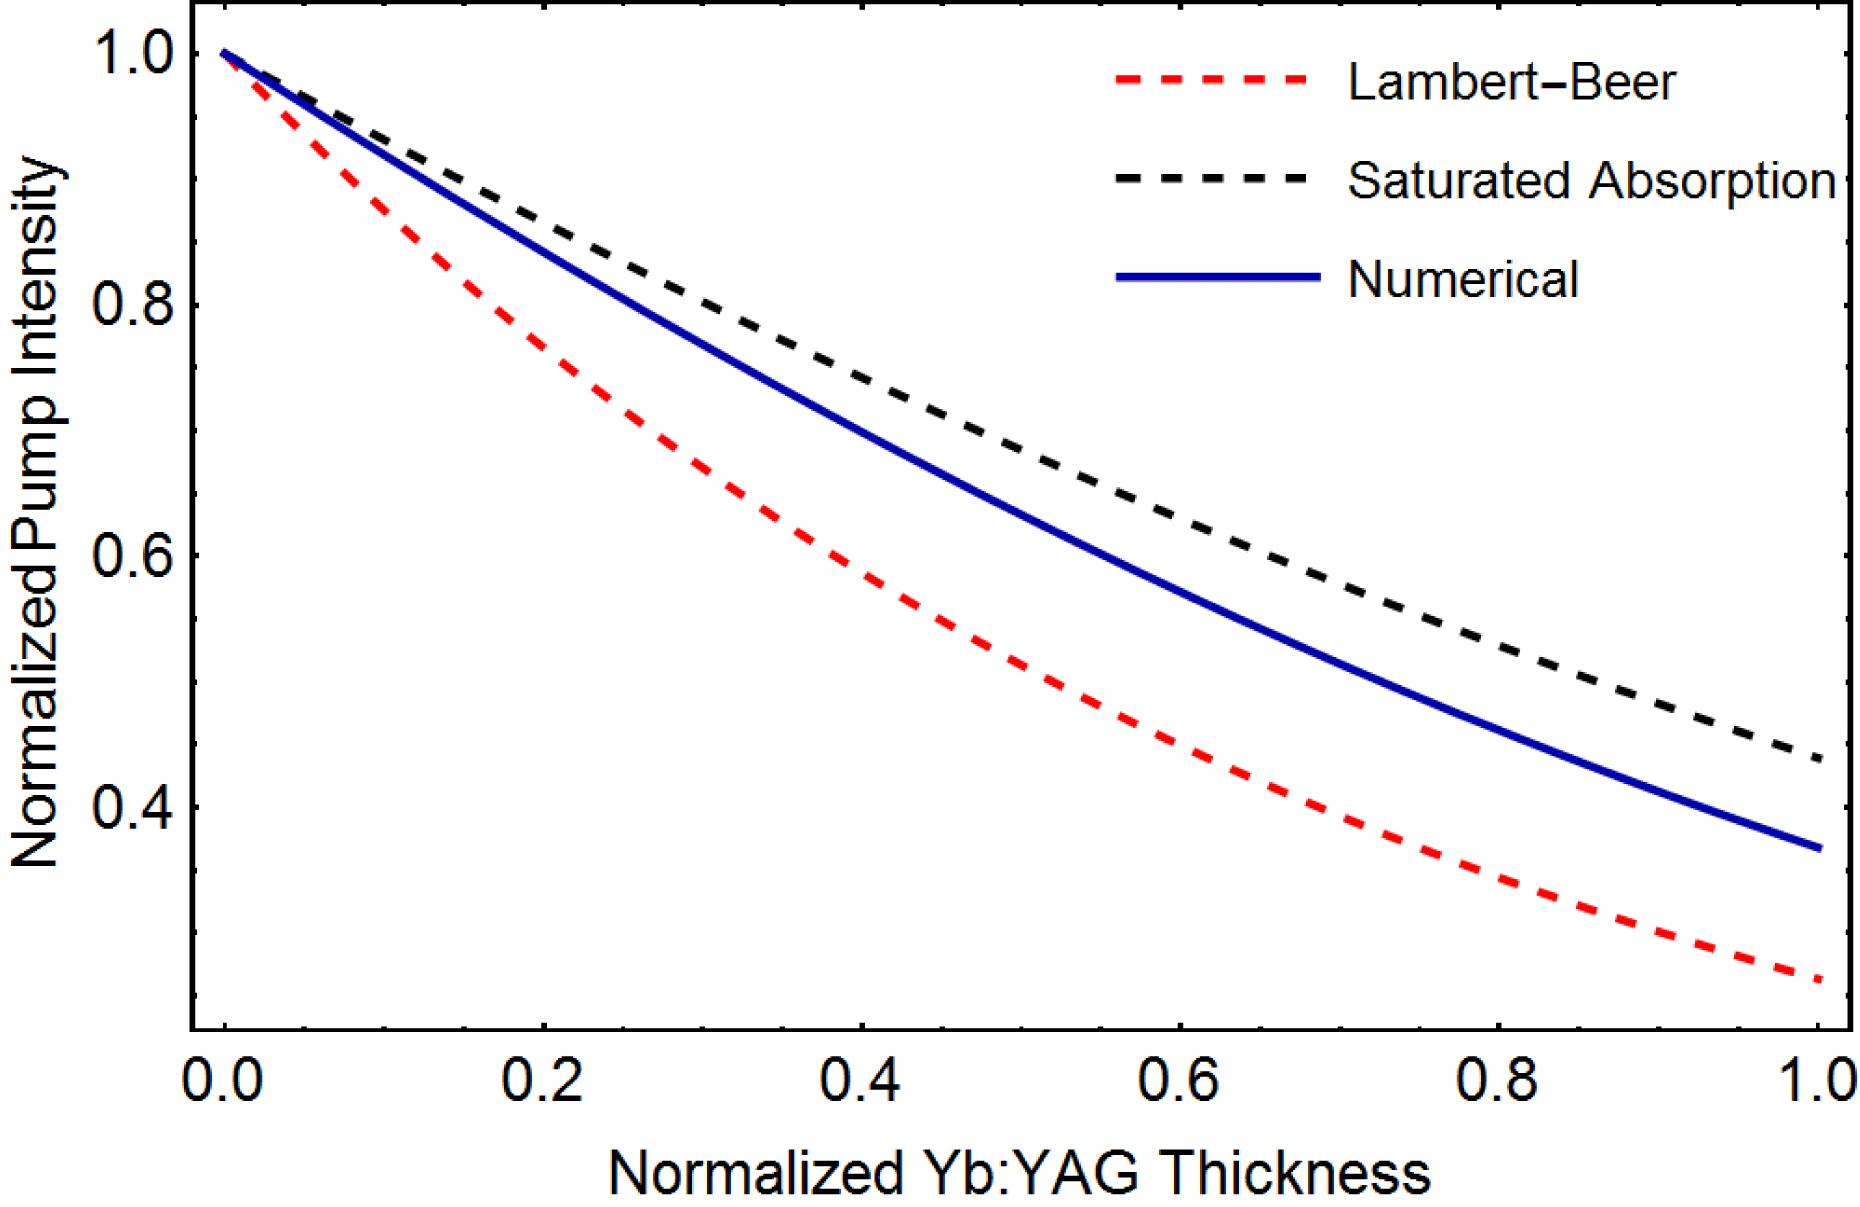 Numerical calculation of the normalized pump intensity within a Yb:YAG crystal in comparison to the Lambert–Beer and saturated absorption models.